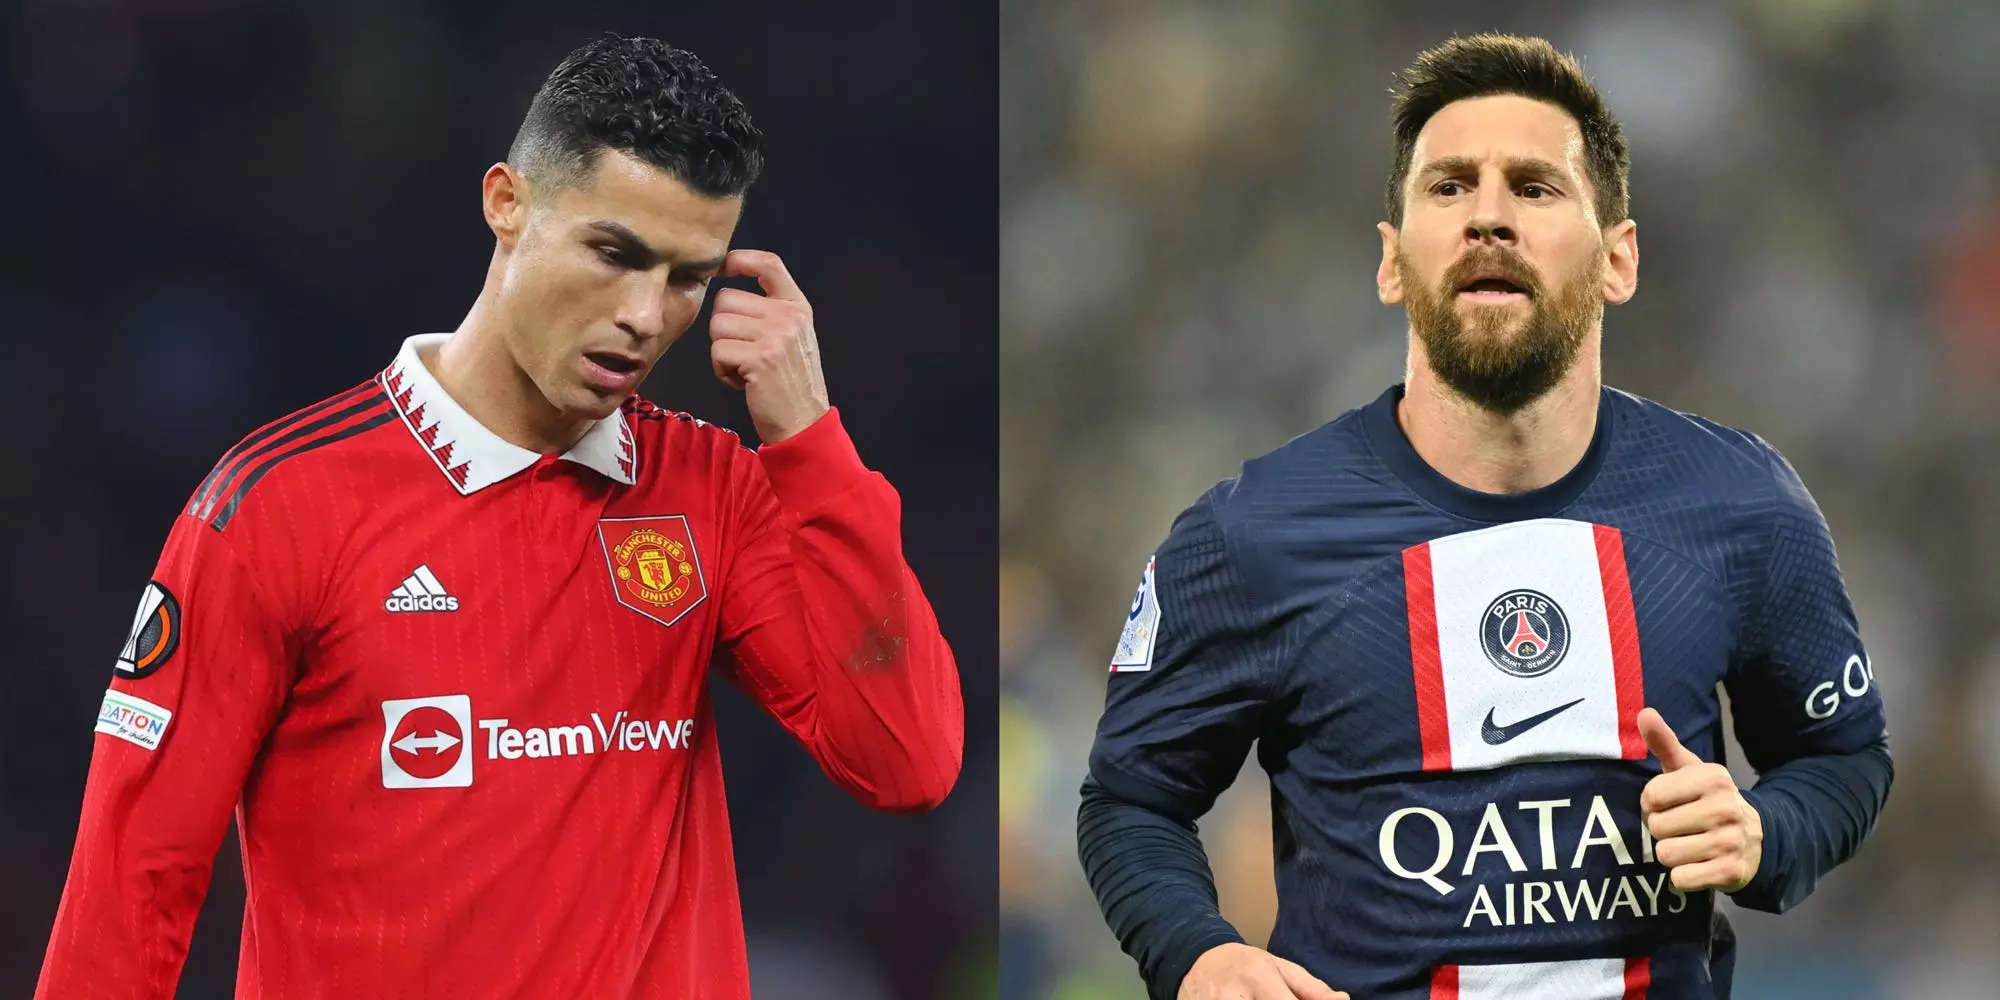 Cristiano Ronaldo and Lionel Messi come together for first-ever